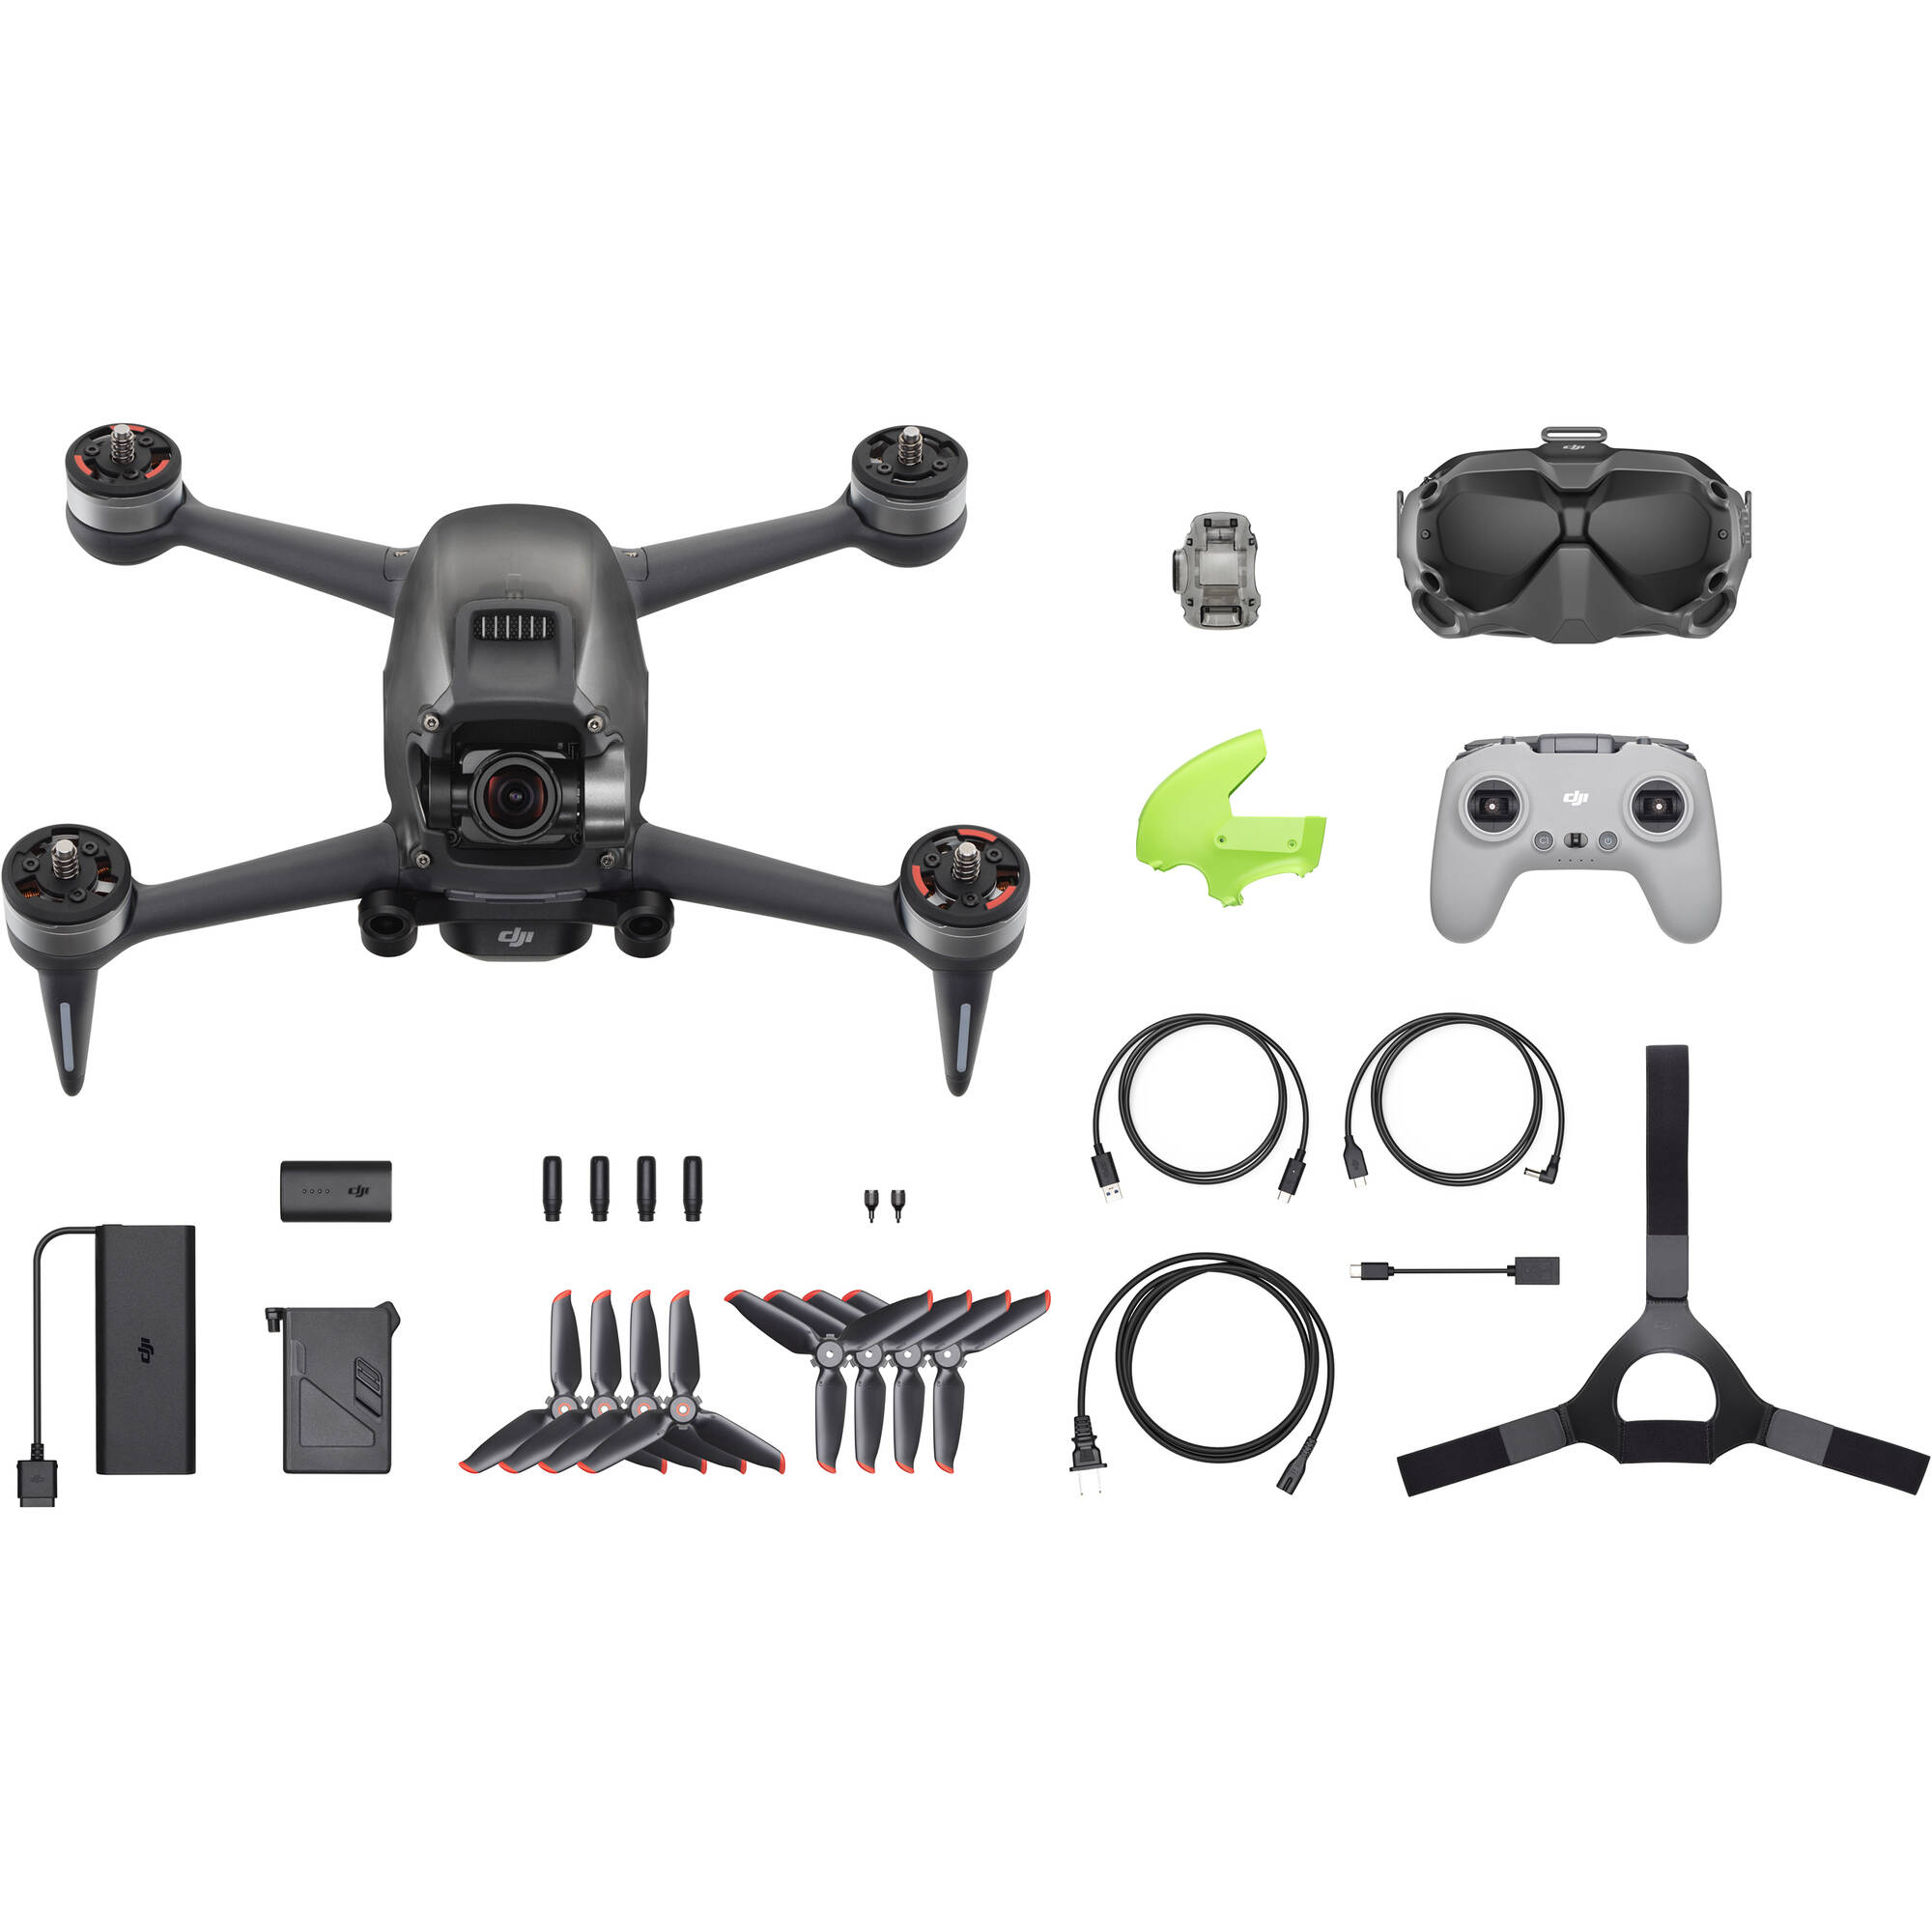 MC-CASES® Valigetta / Custiodia professionale per DJI FPV Combo Made in Germany Fly More Set Explorer Edition 